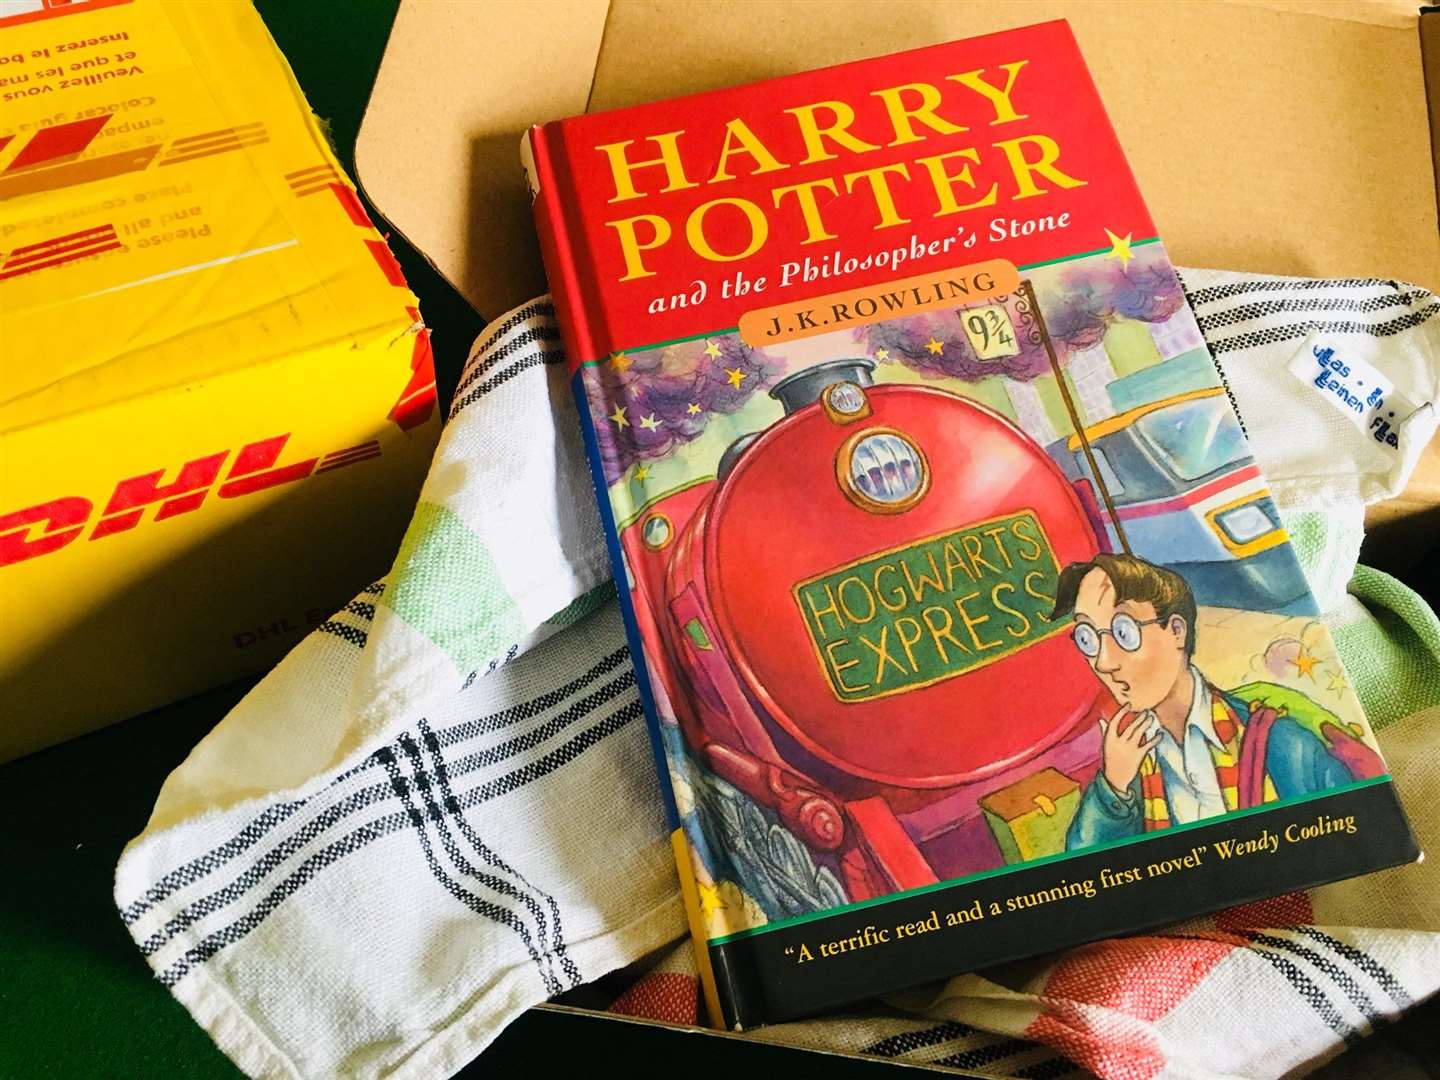 The first edition Harry Potter book which arrived at the auction house wrapped in a tea towel (Hansons/PA)